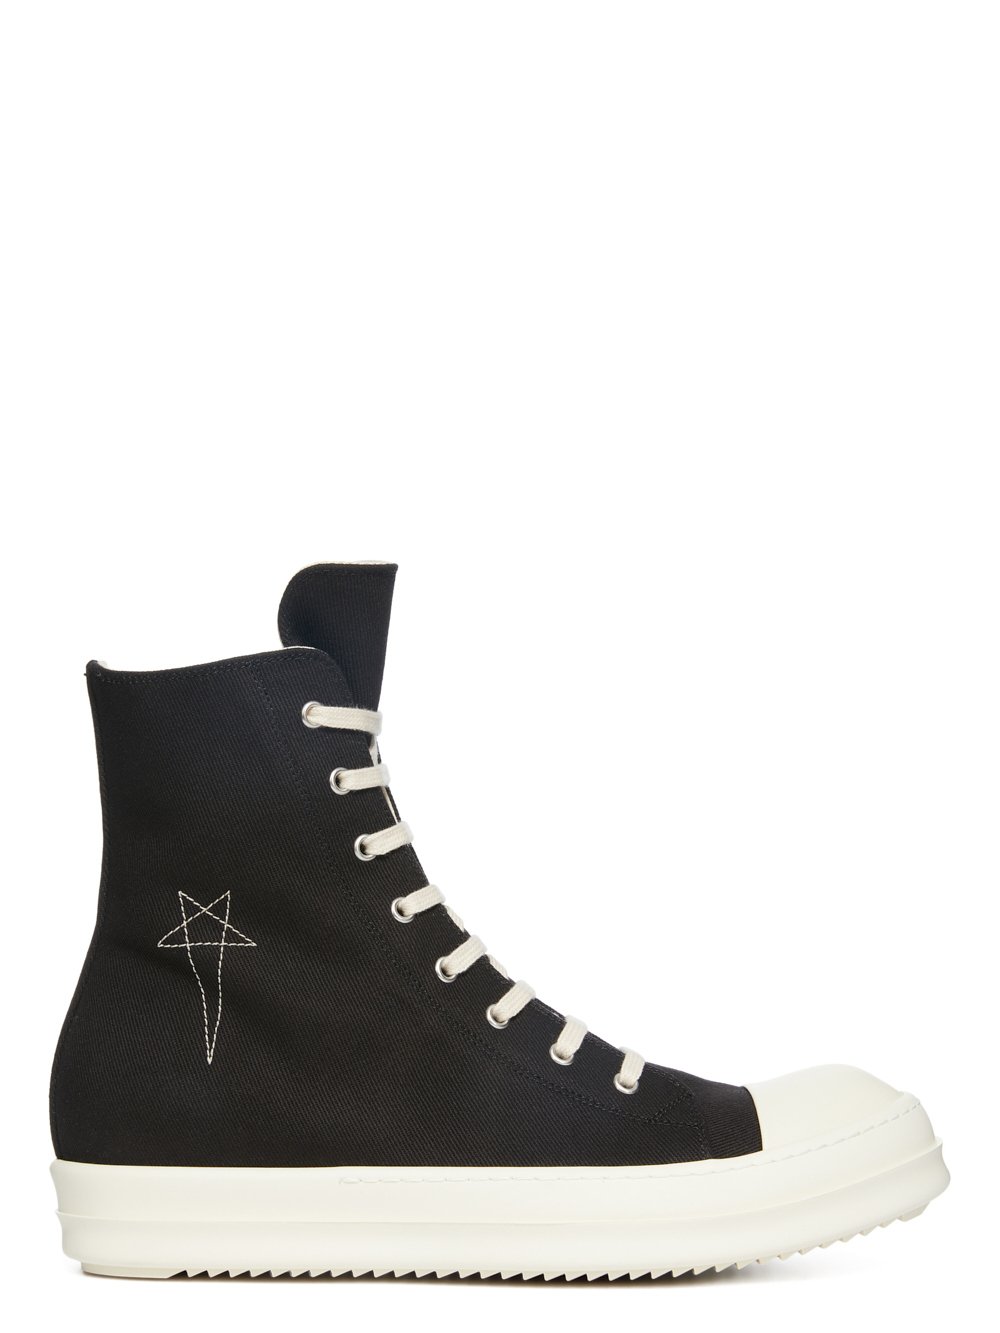 DRKSHDW FW23 LUXOR SNEAKS IN BLACK AND PEARL 13OZ OVERDYED DENIM